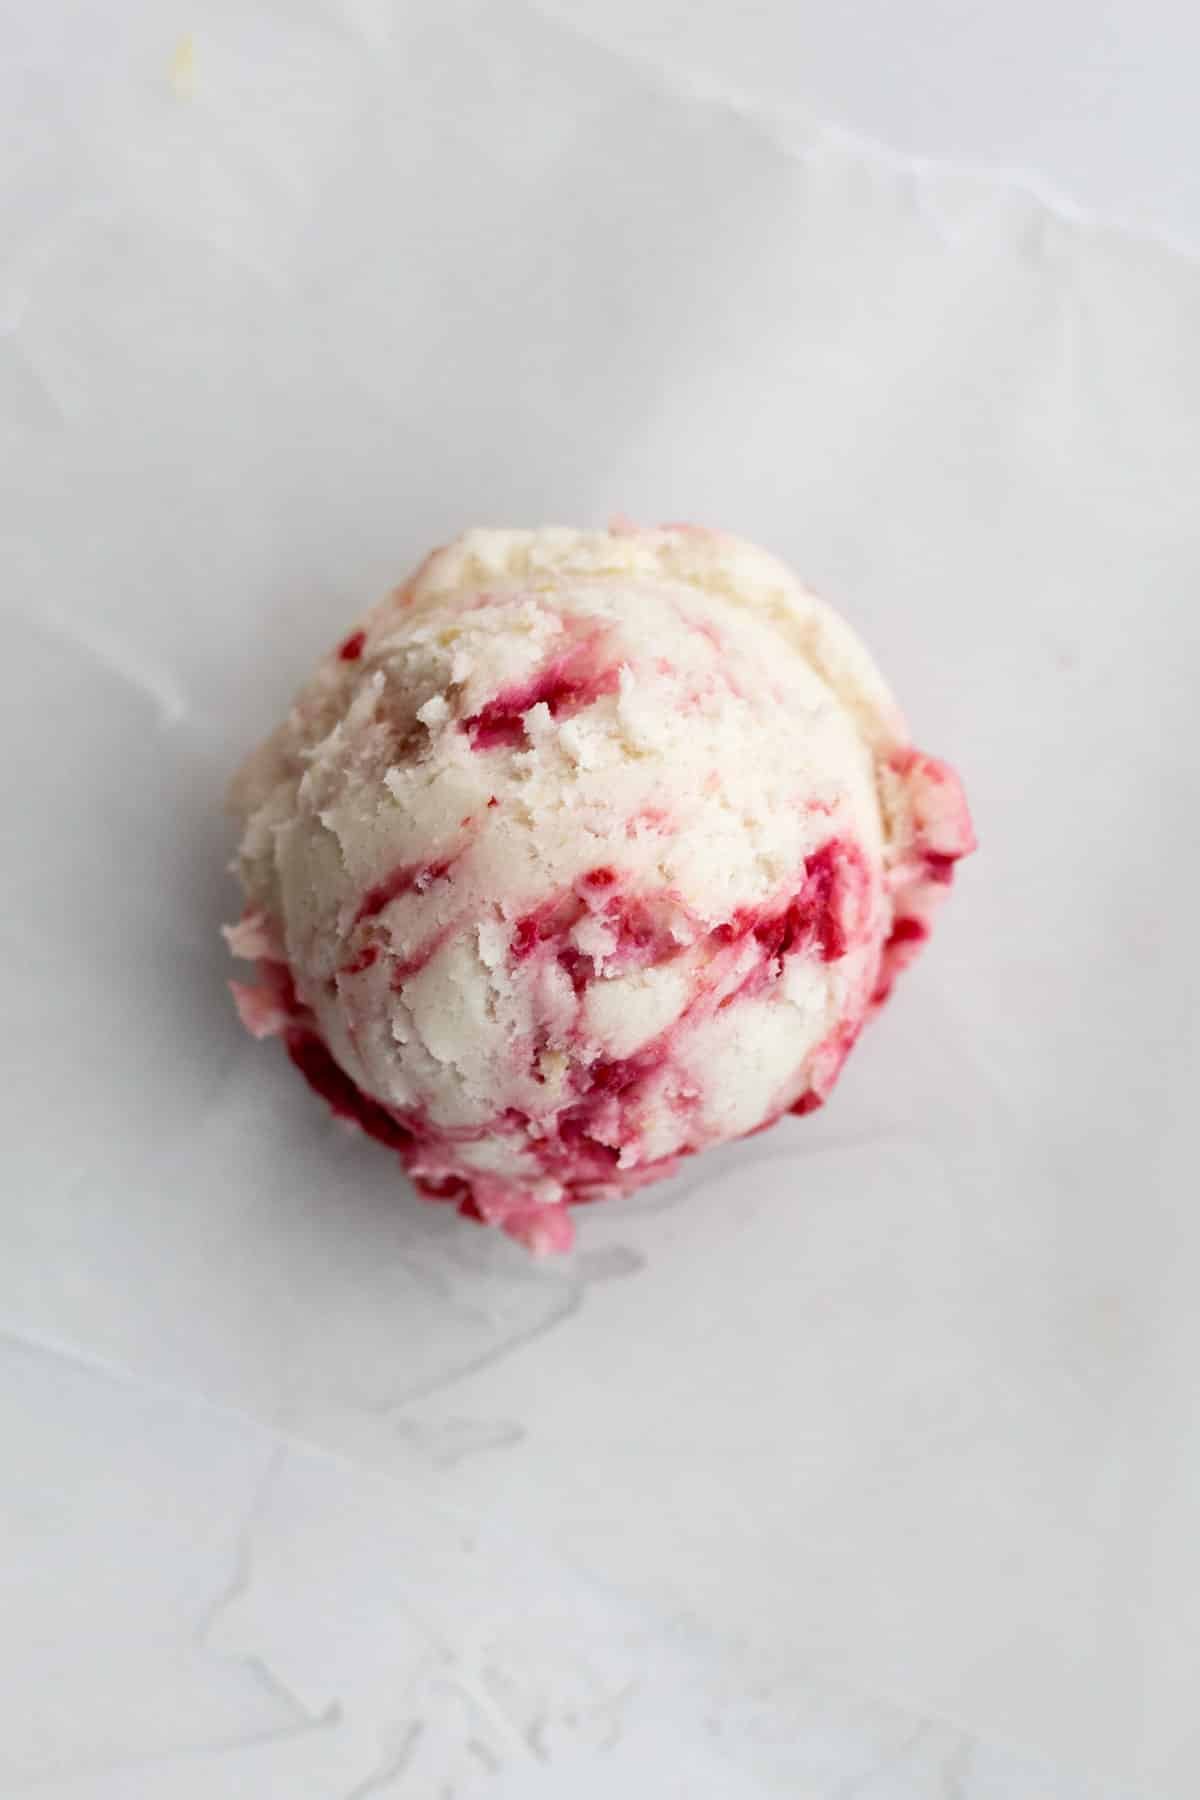 A scooped ball of Lemon Raspberry Cookie dough.